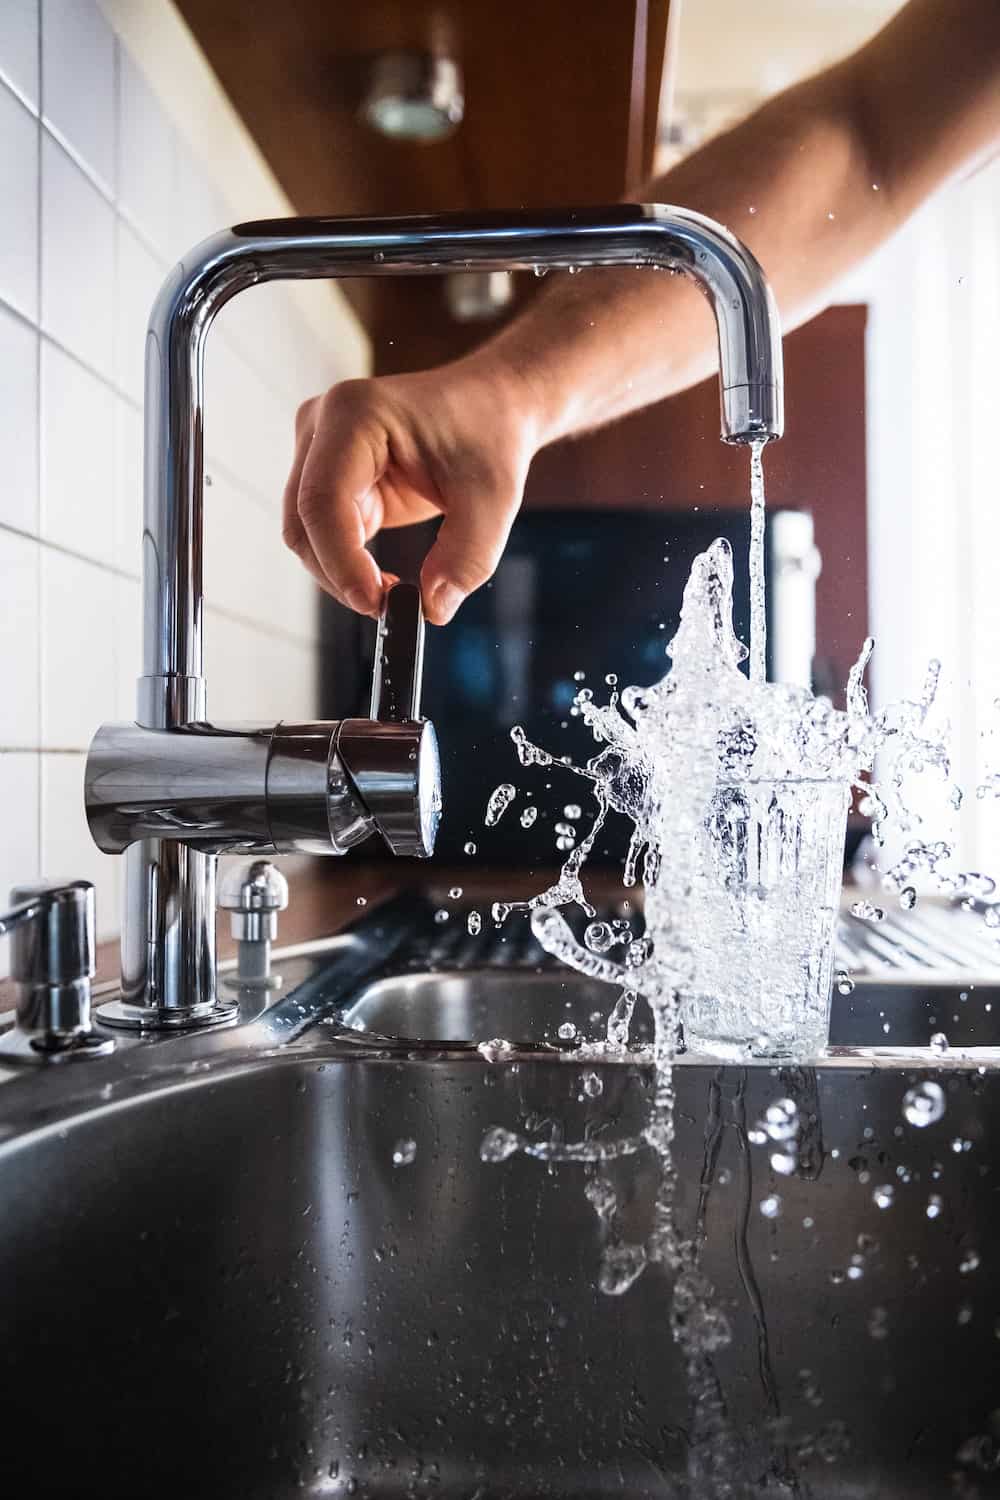 Basic Ideas to Elevate Your Kitchen Plumbing